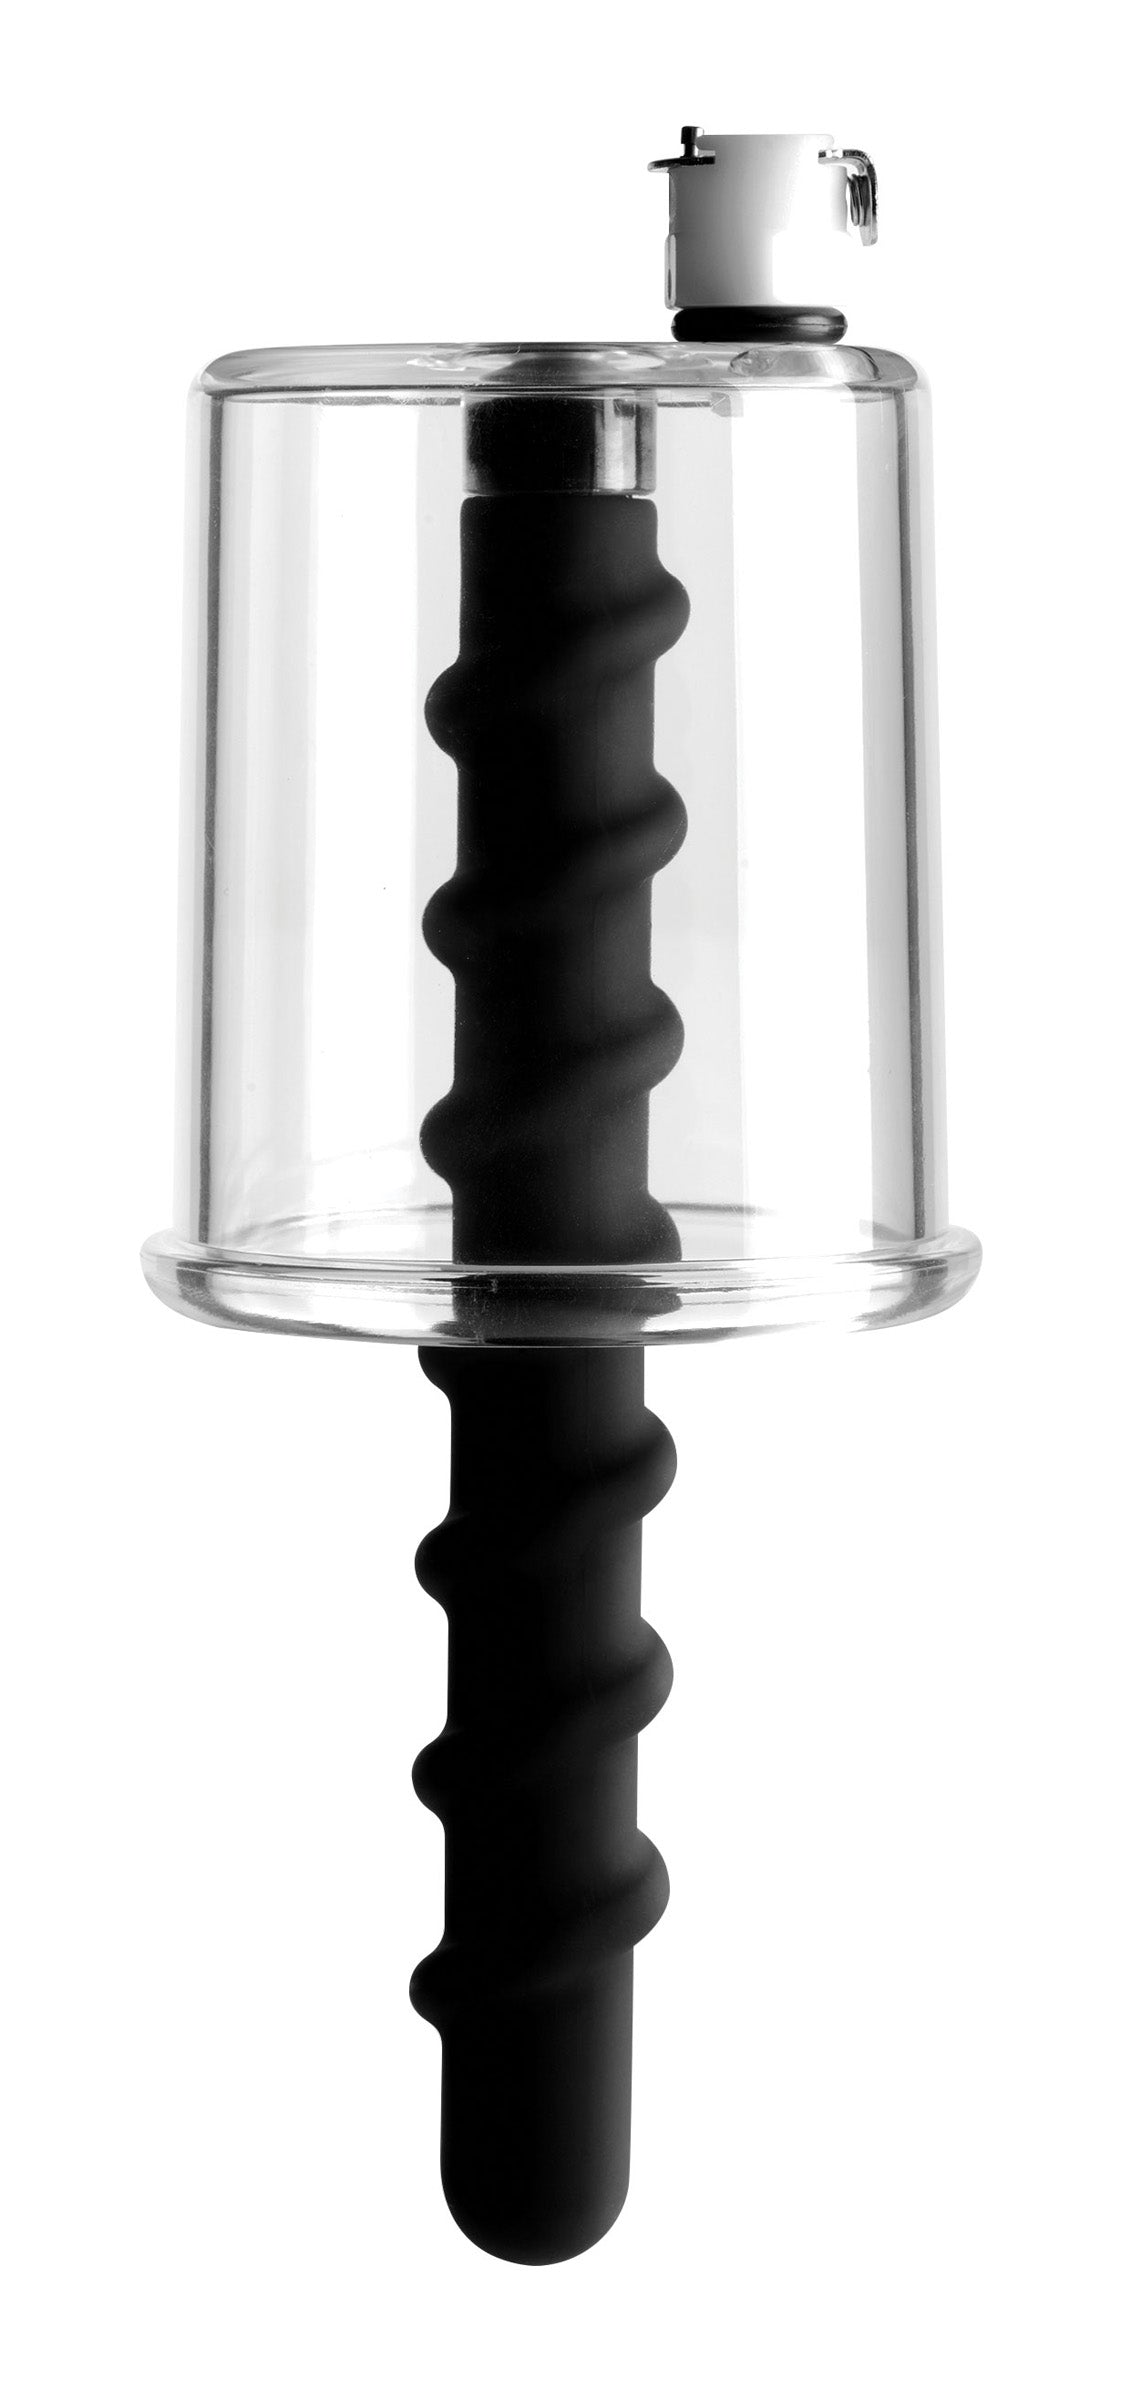 Rosebud Driller Cylinder with Silicone Swirl Insert